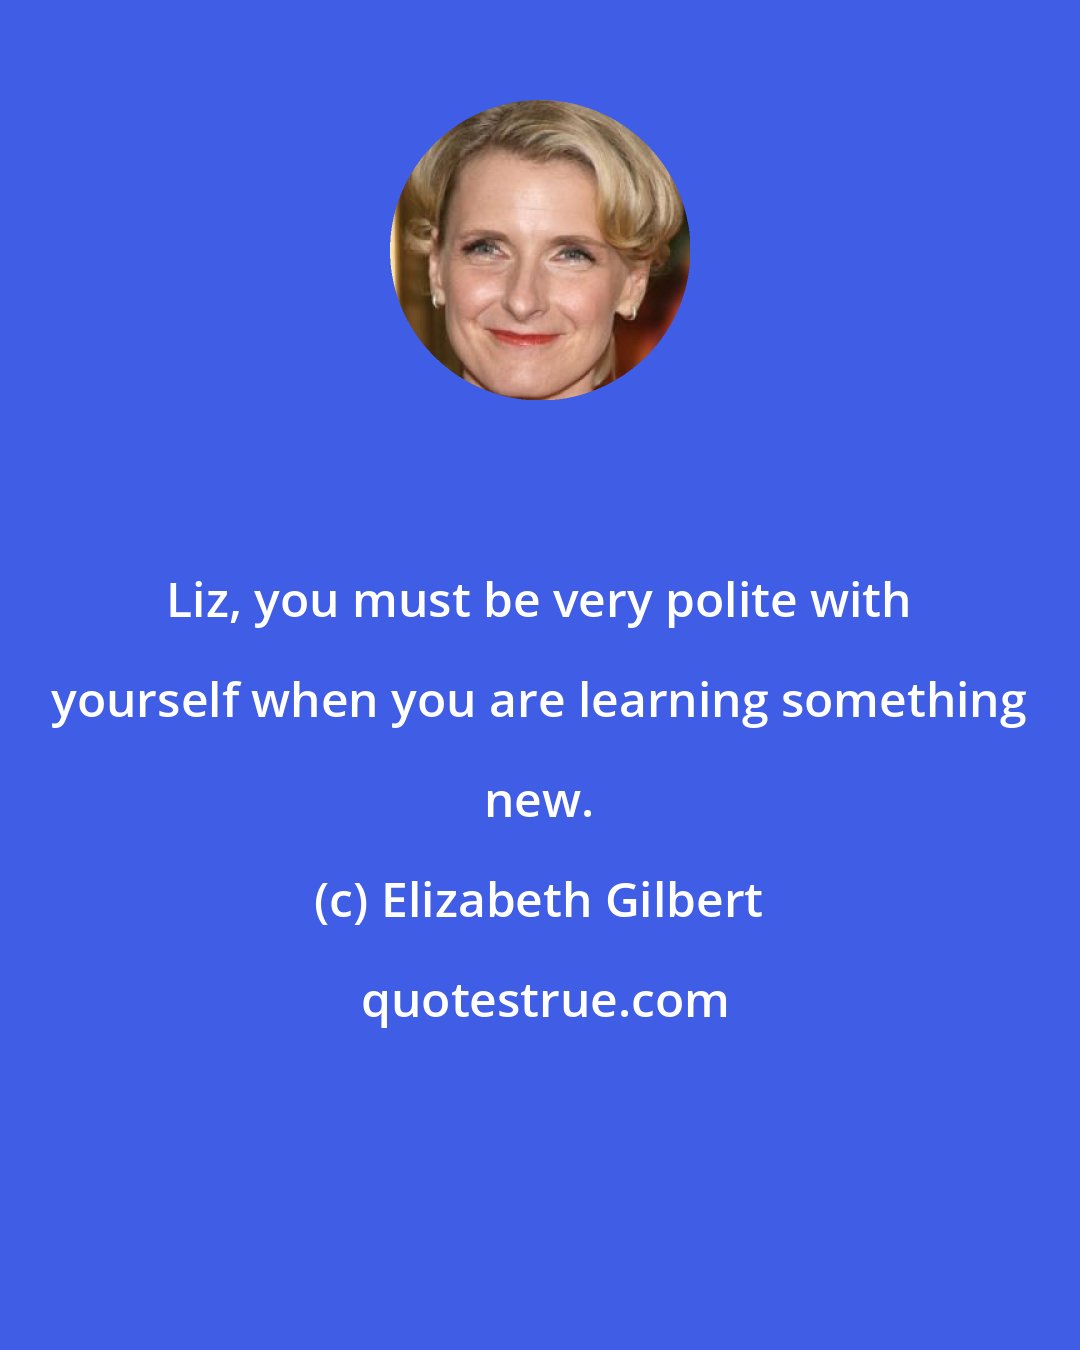 Elizabeth Gilbert: Liz, you must be very polite with yourself when you are learning something new.